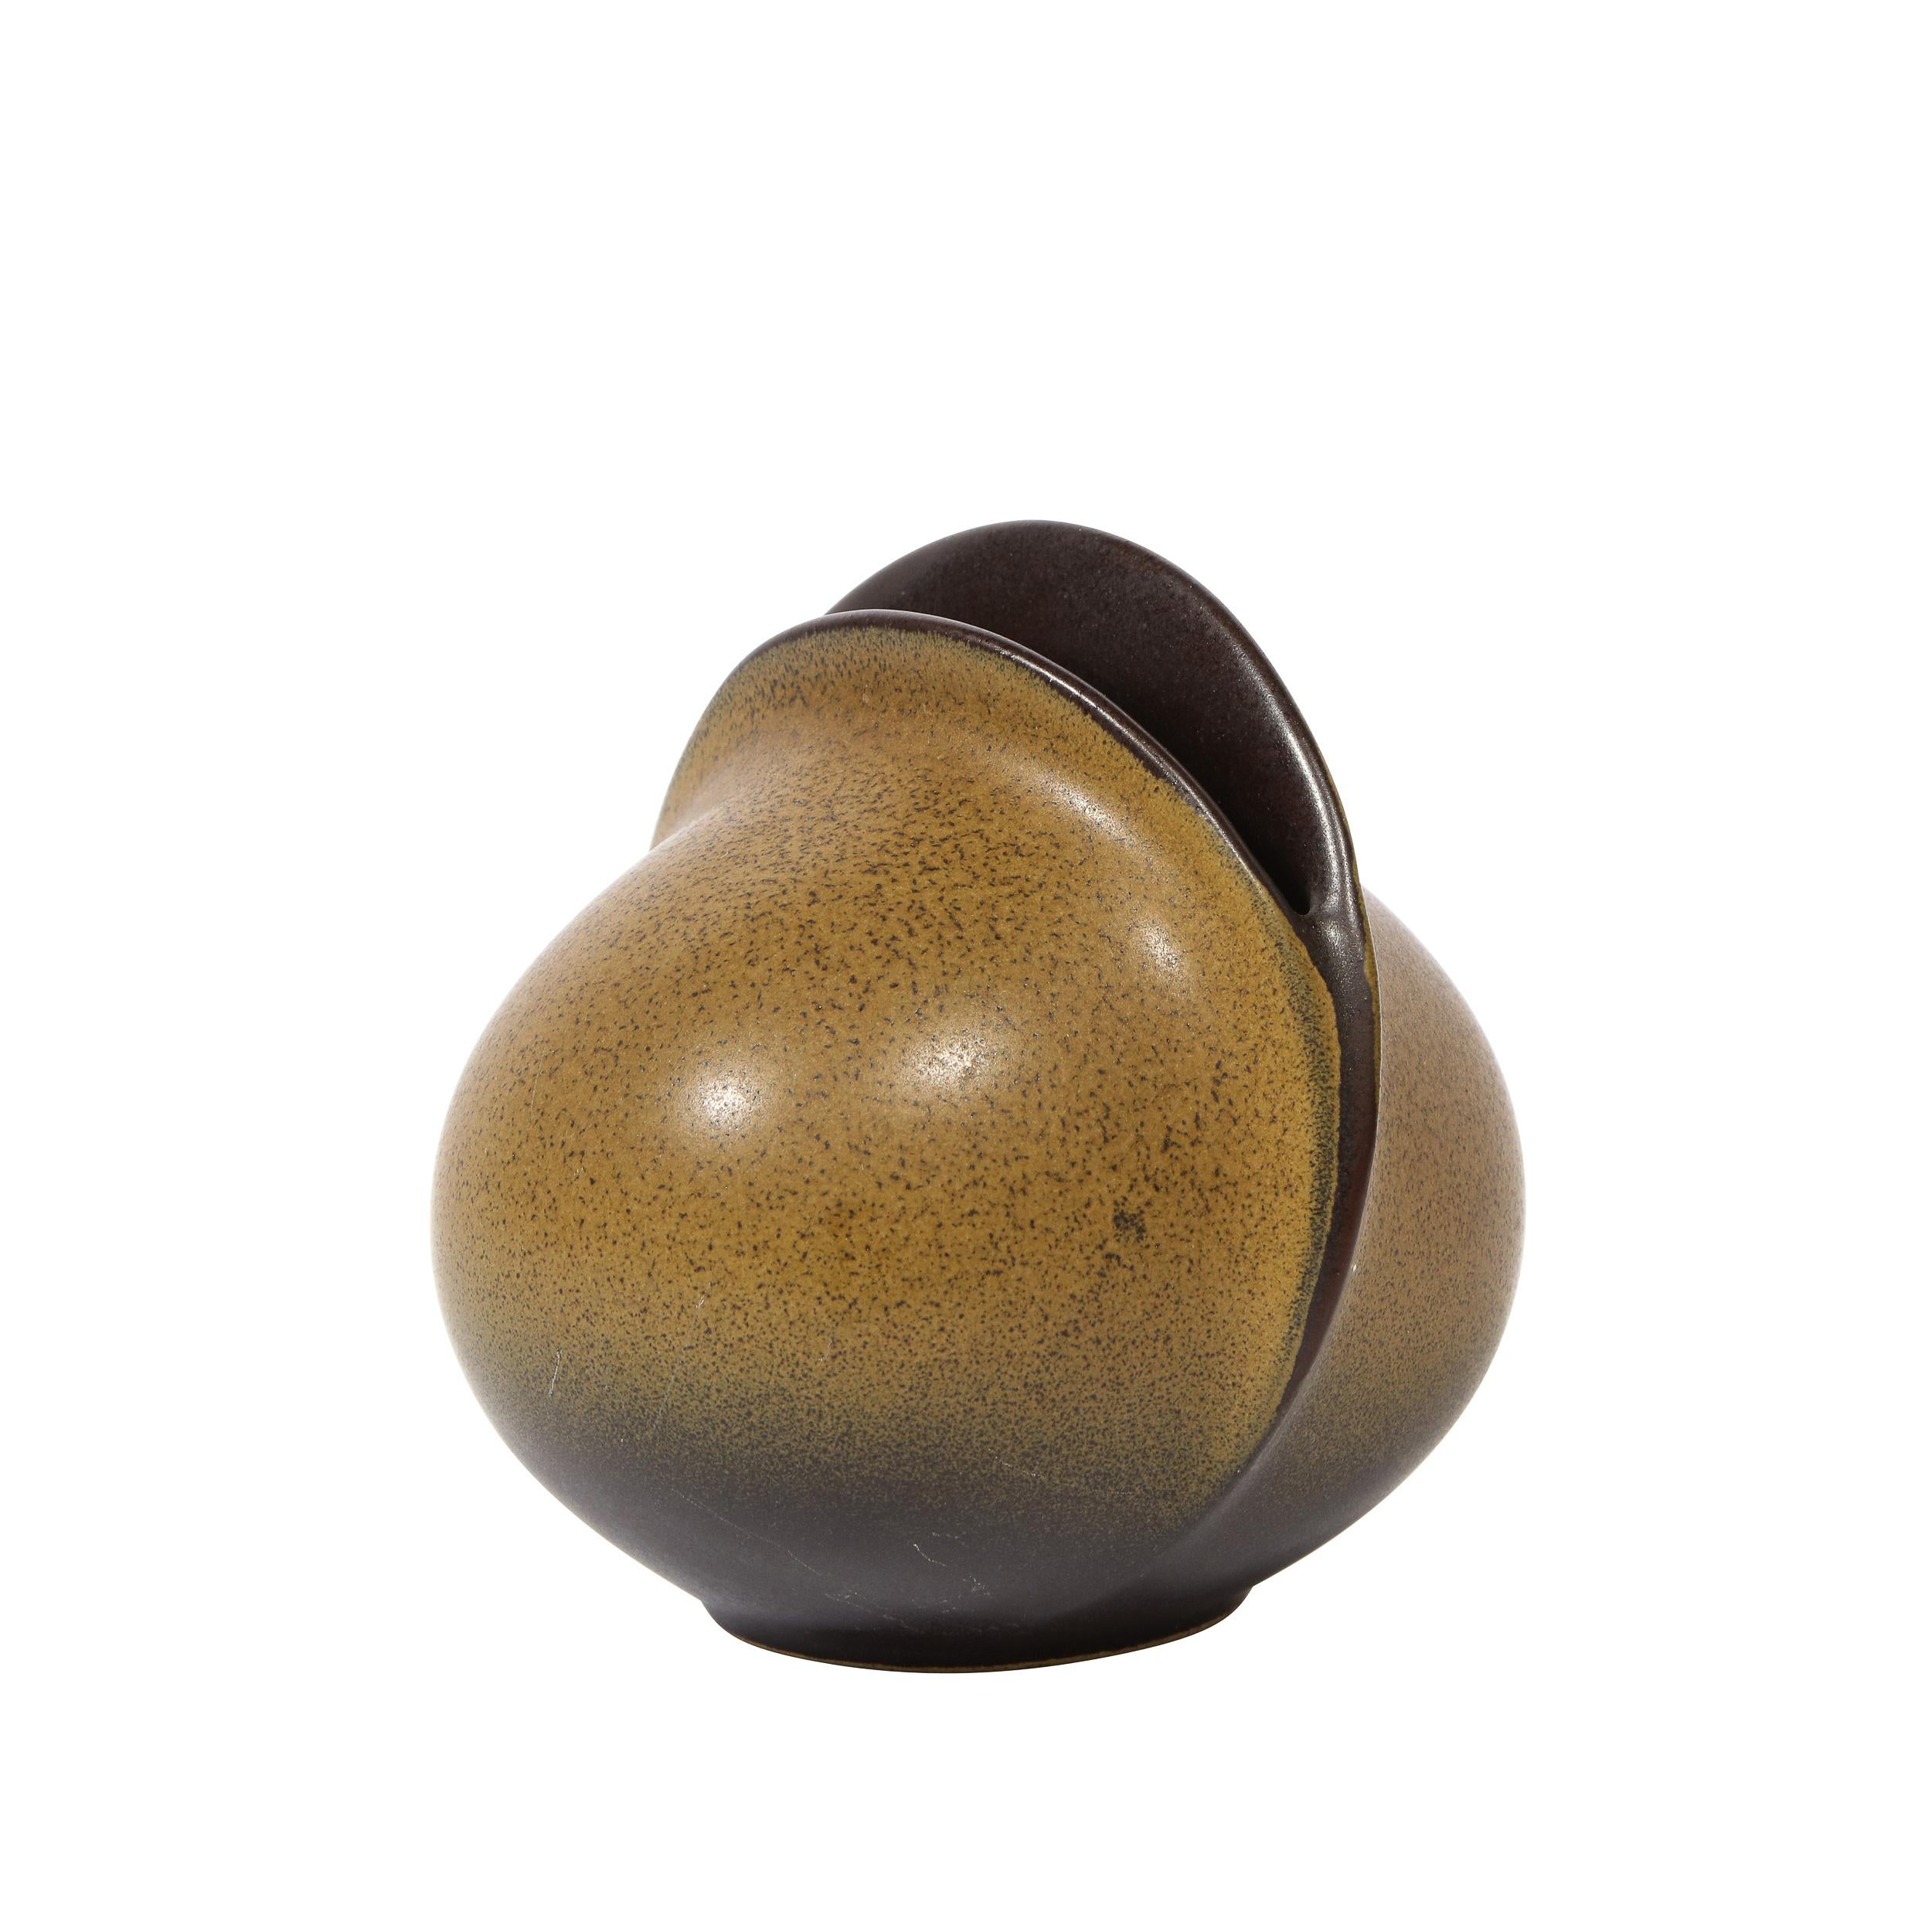 Mid-20th Century Mid-Century Modern Sculptural Spherical Vase with Ovoid Opening by Rosenthal For Sale